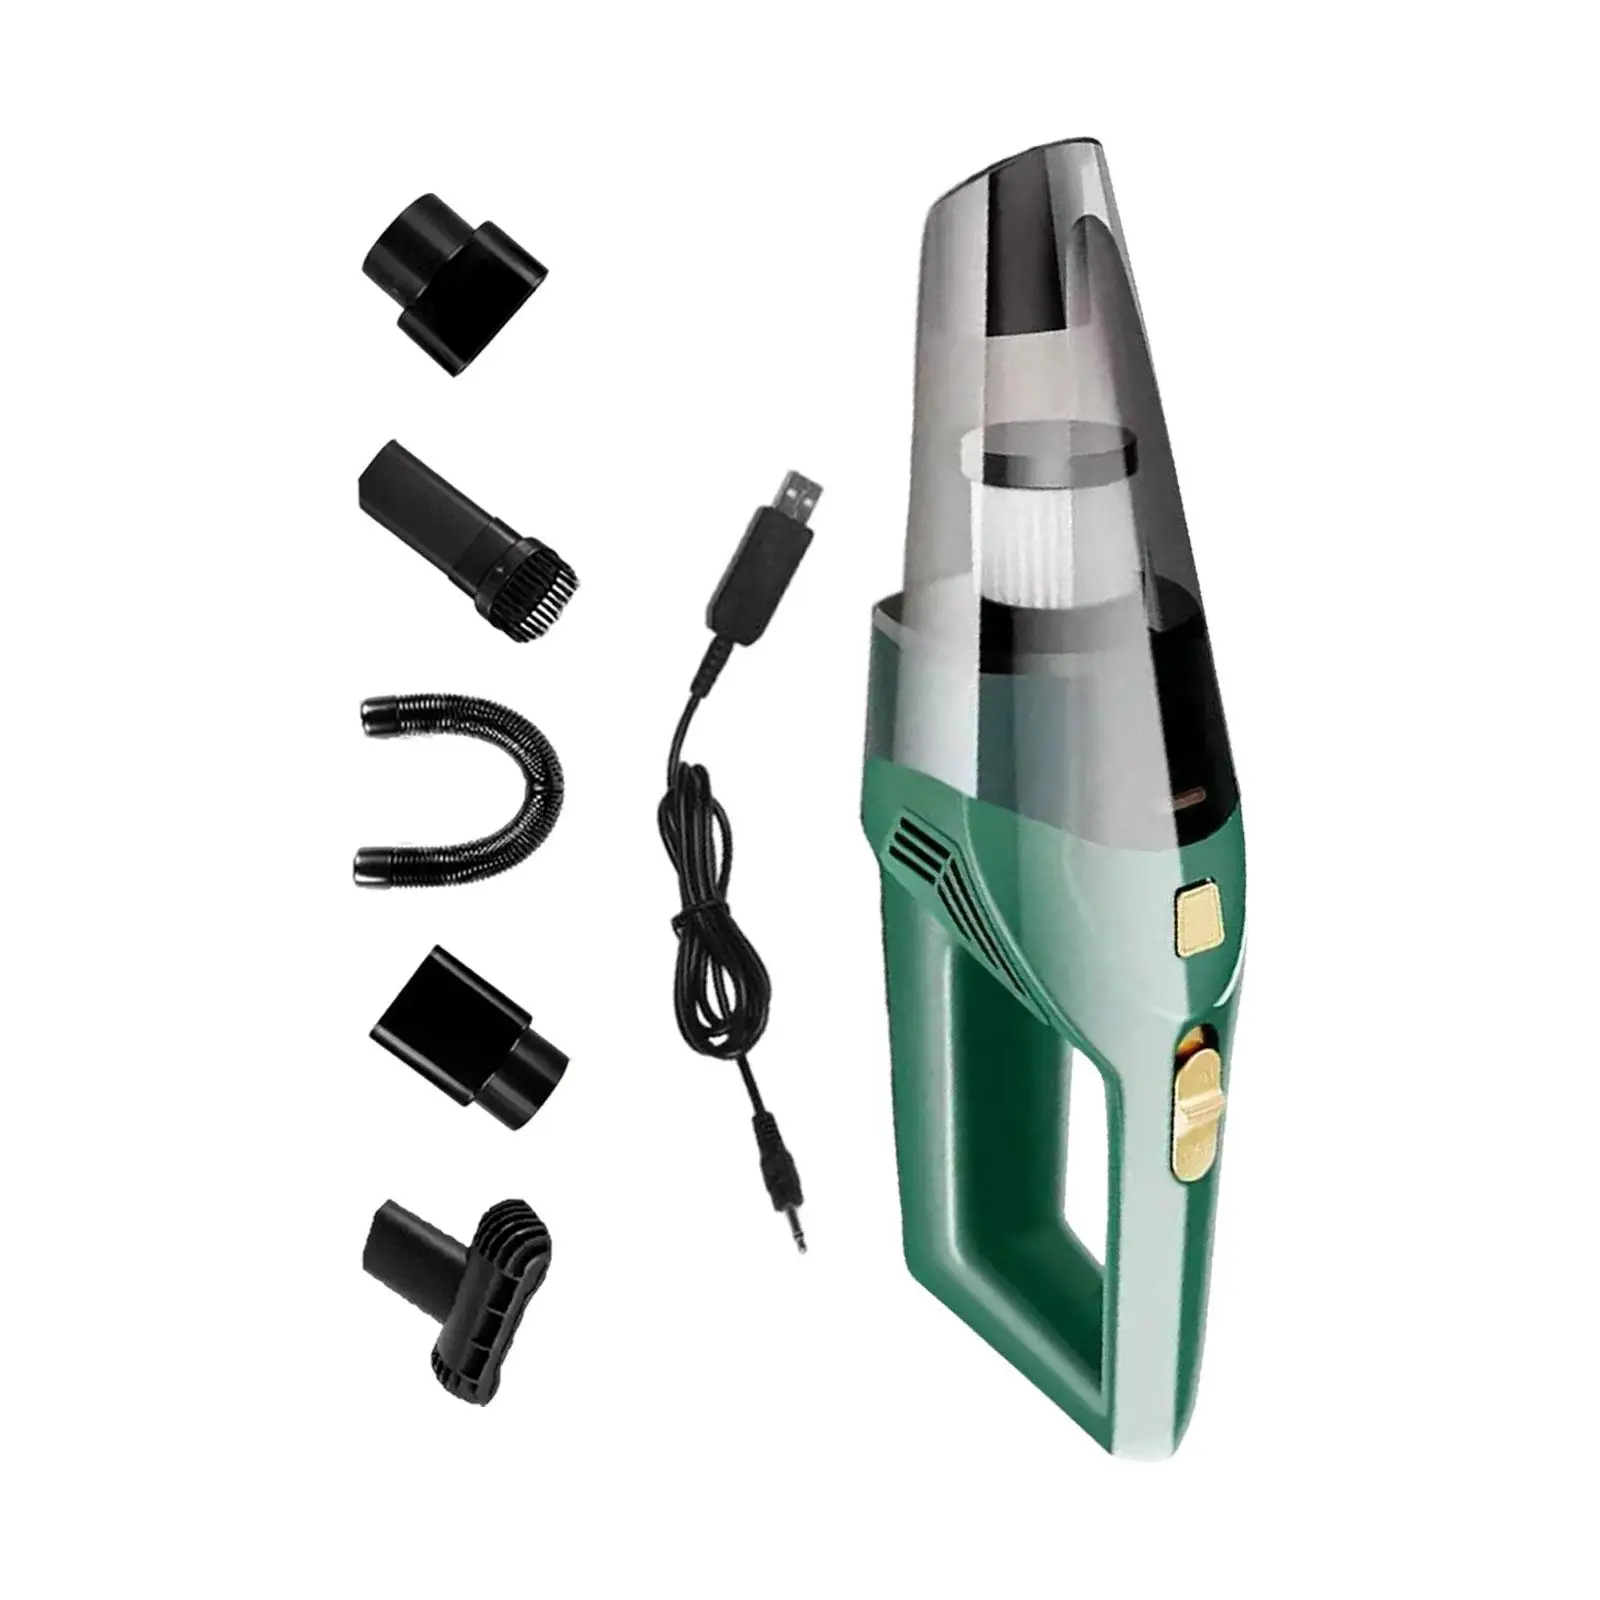 Handheld Car Vacuum Cleaner 120W 12V Powerful Handheld Vacuum Wet and Dry Using for Office Pet Hair Car Interior Kitchen Home